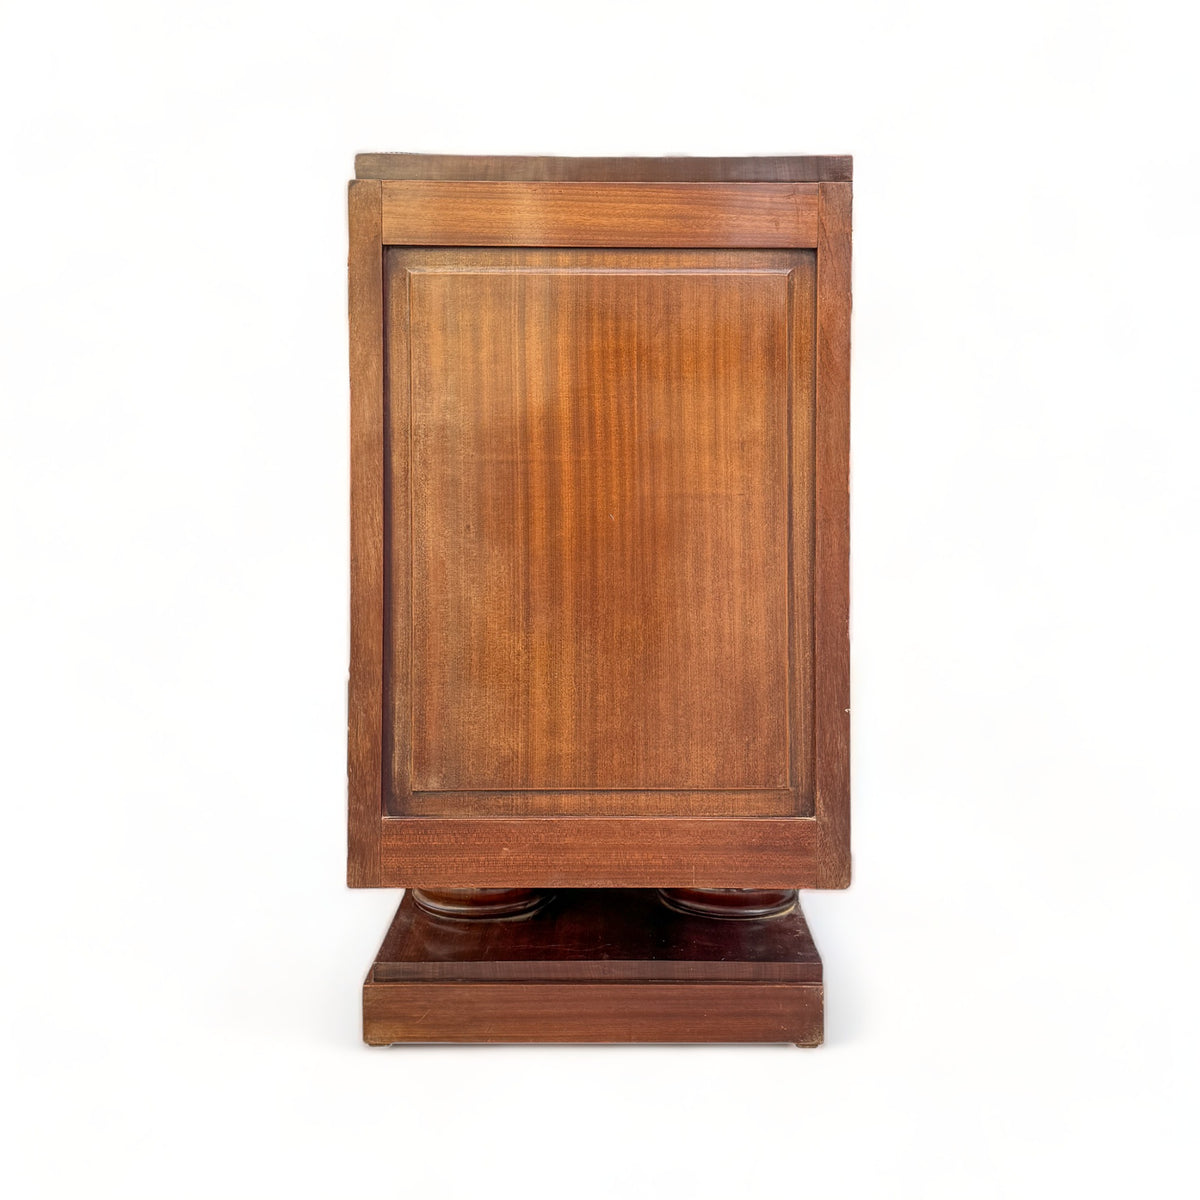 French Deco Cabinet